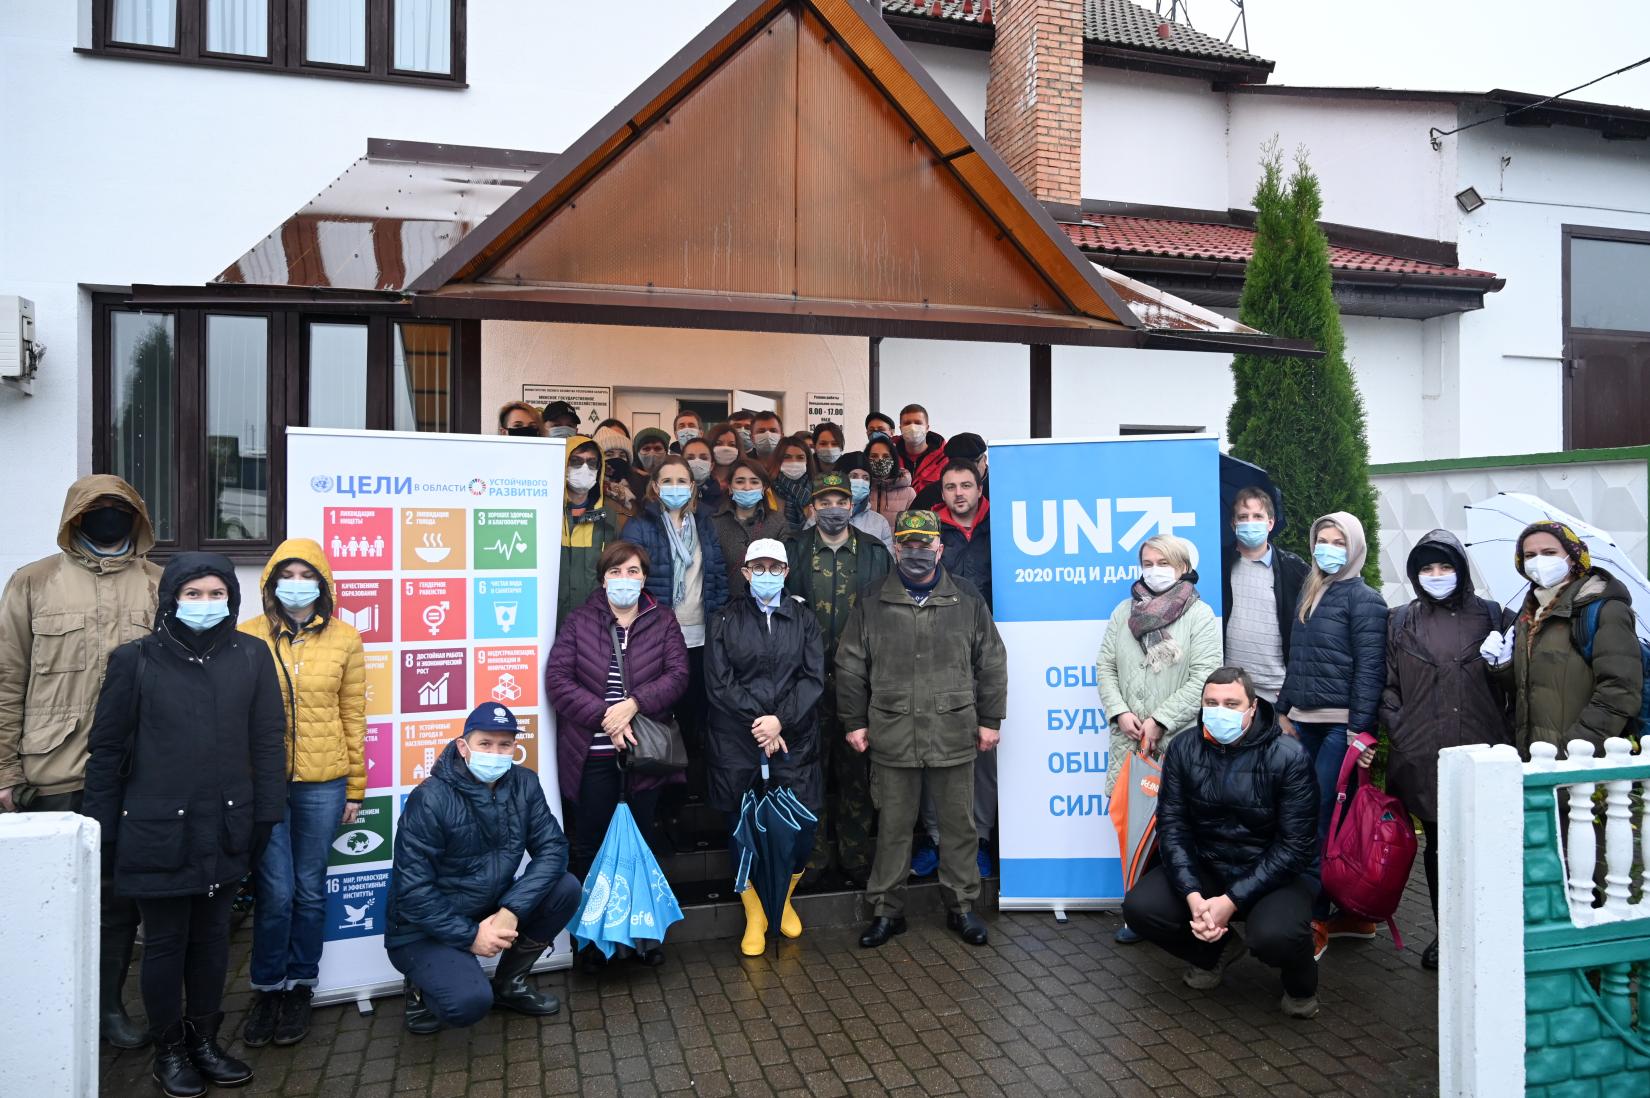 UN and Molodechno forestry staff